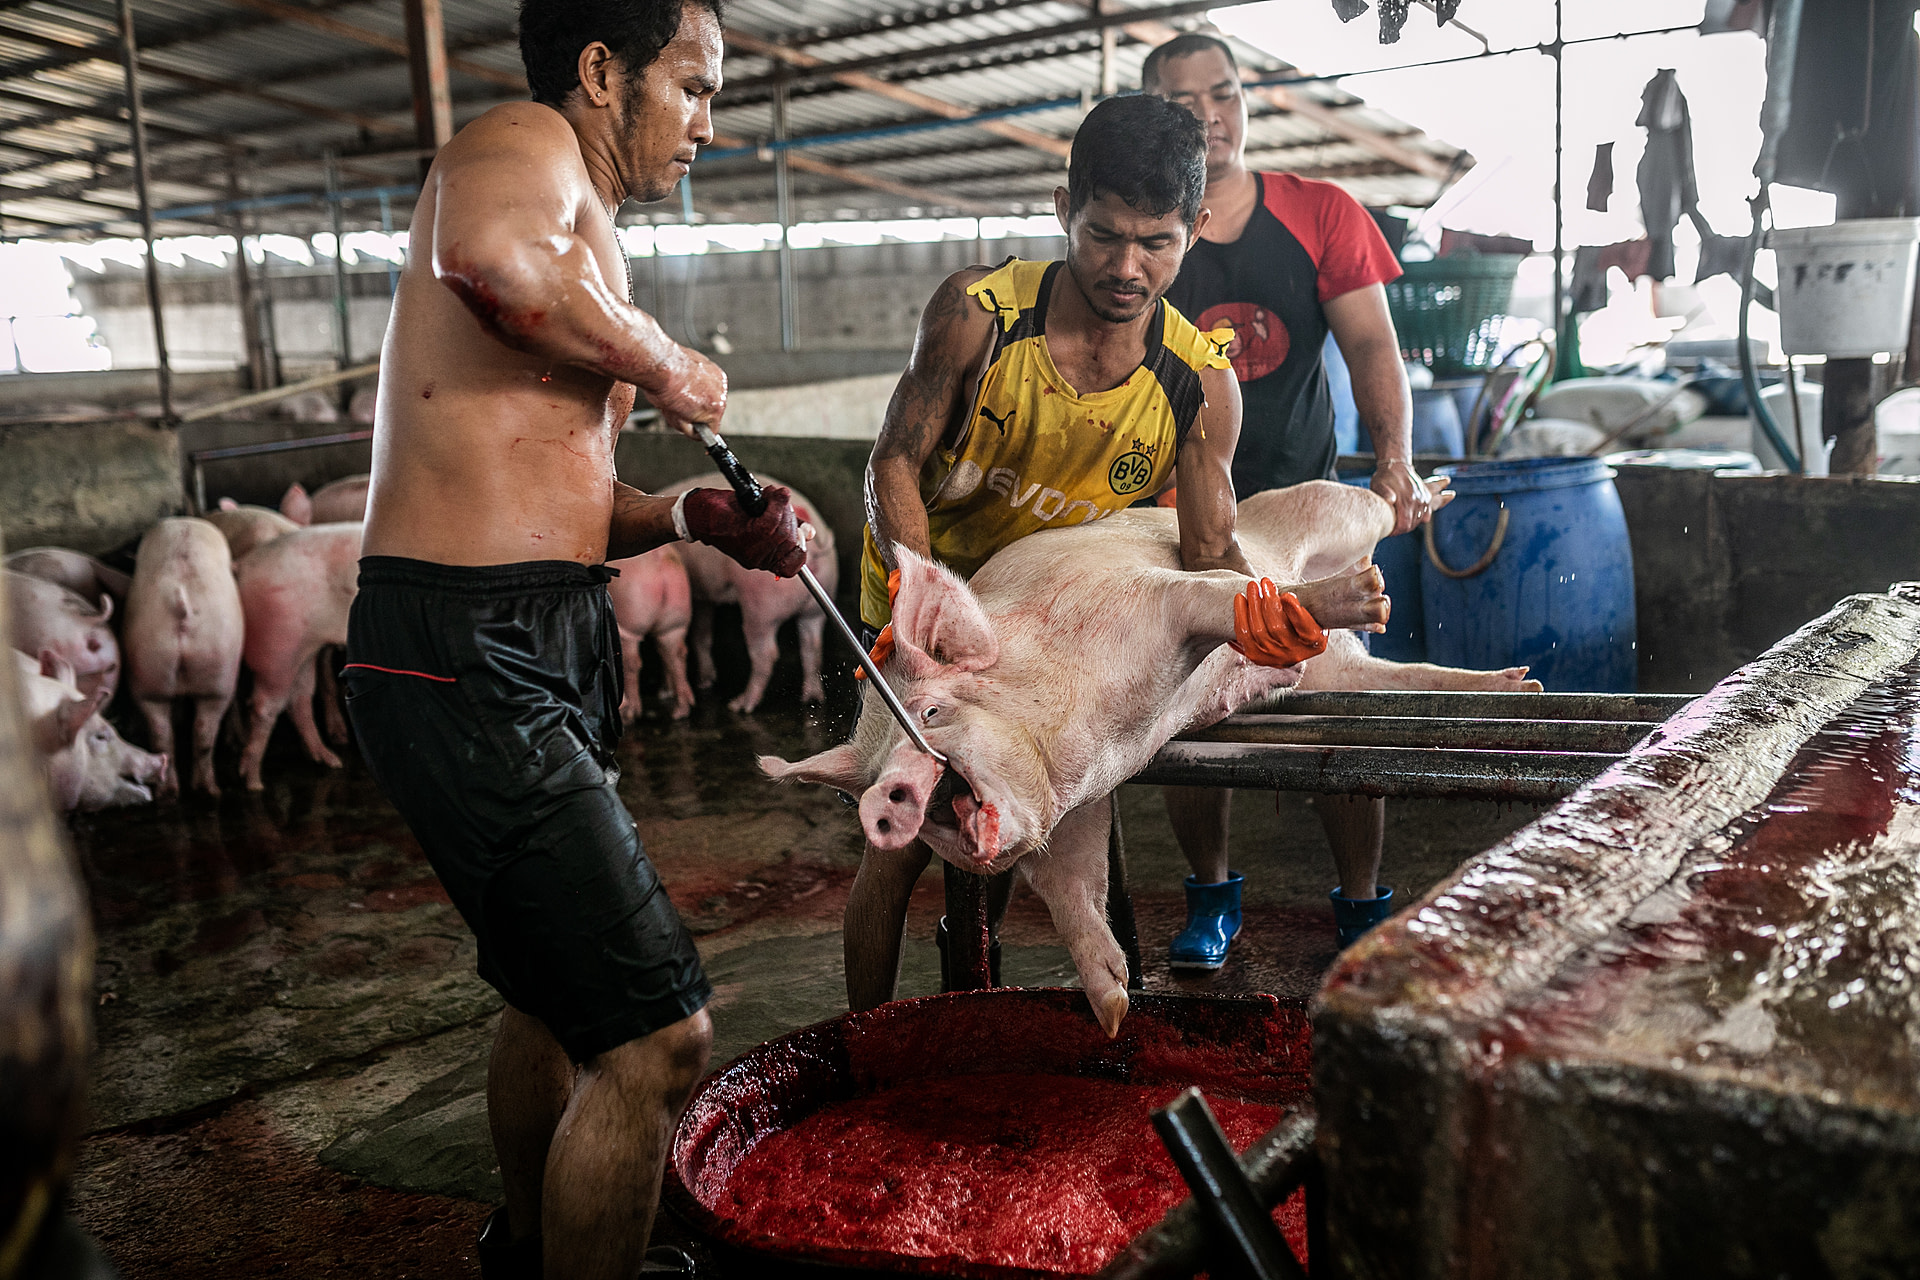 A pig is pulled from the group with a metal hook through her mouth, before being clubbed and stabbed. Thailand, 2019. Andrew Skowron / HIDDEN / We Animals Media